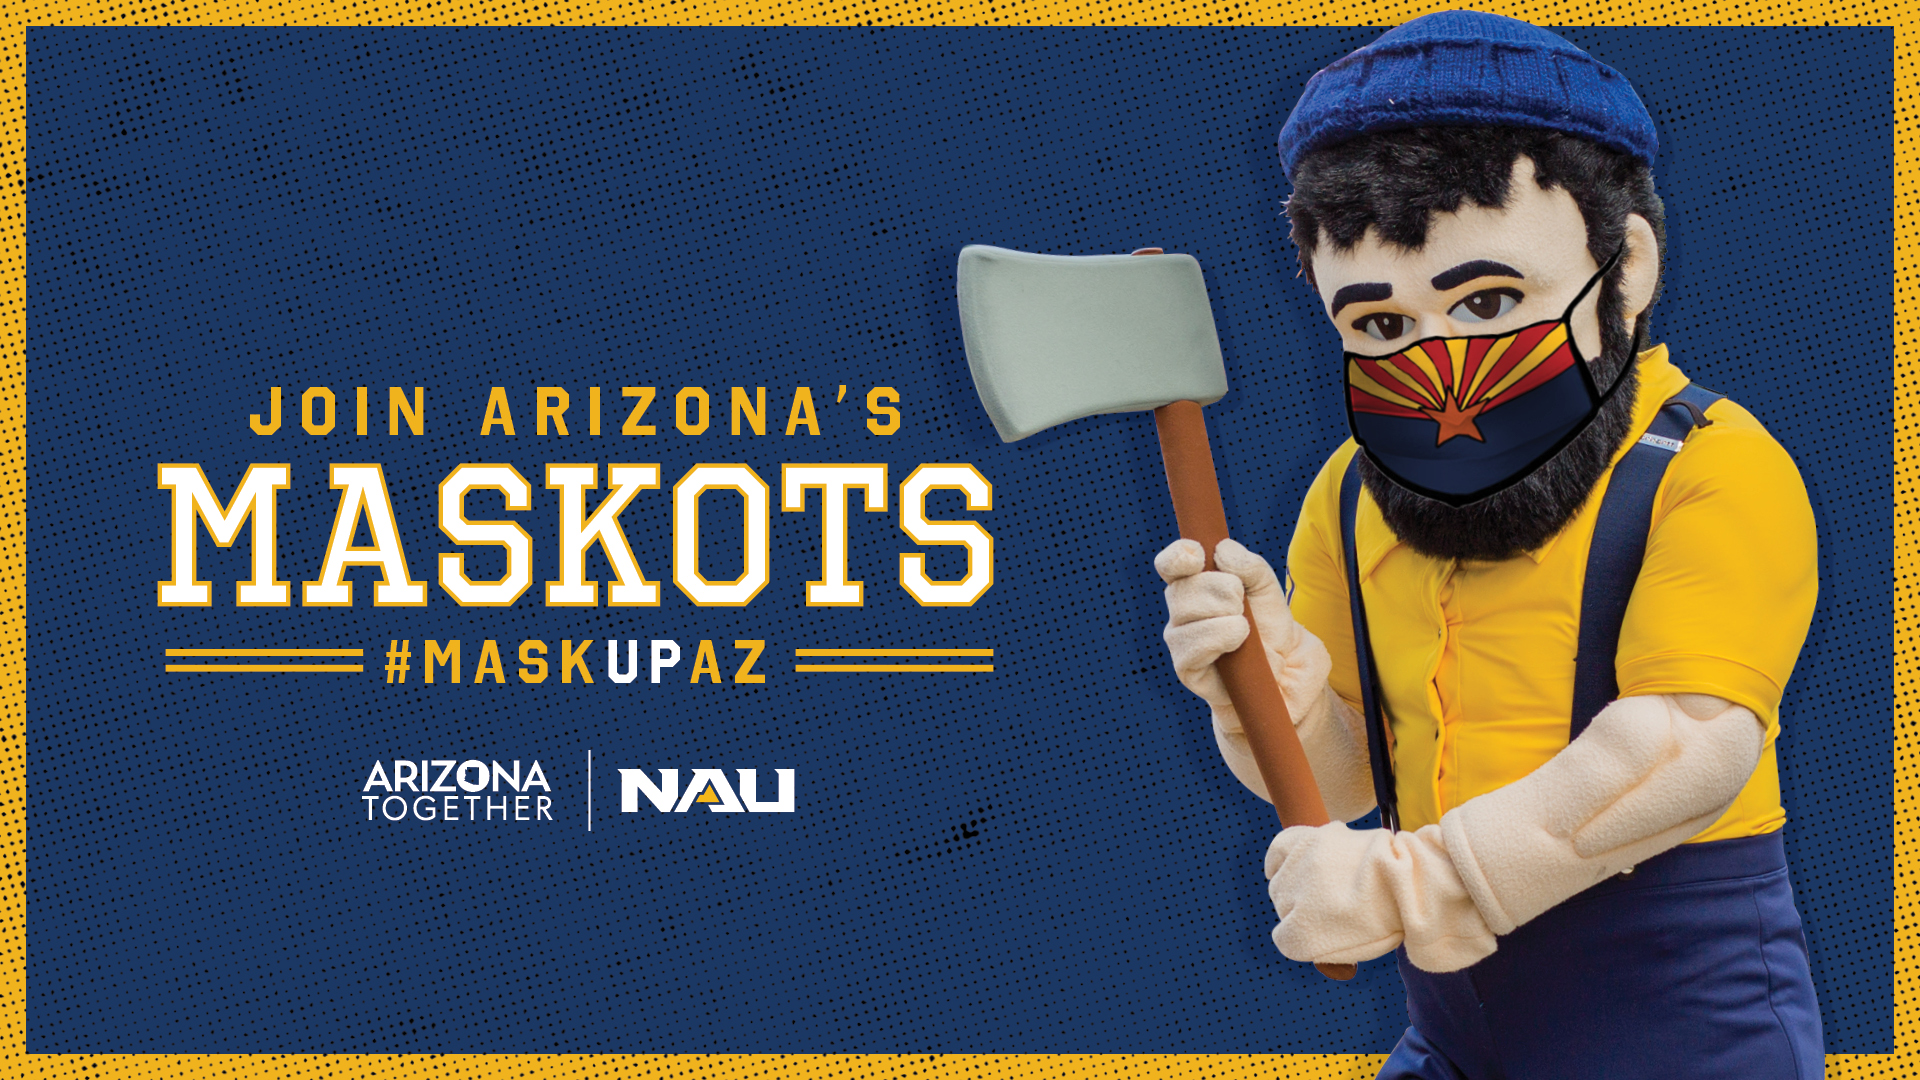 Mask up with Mascots' promotes social distancing and safety at